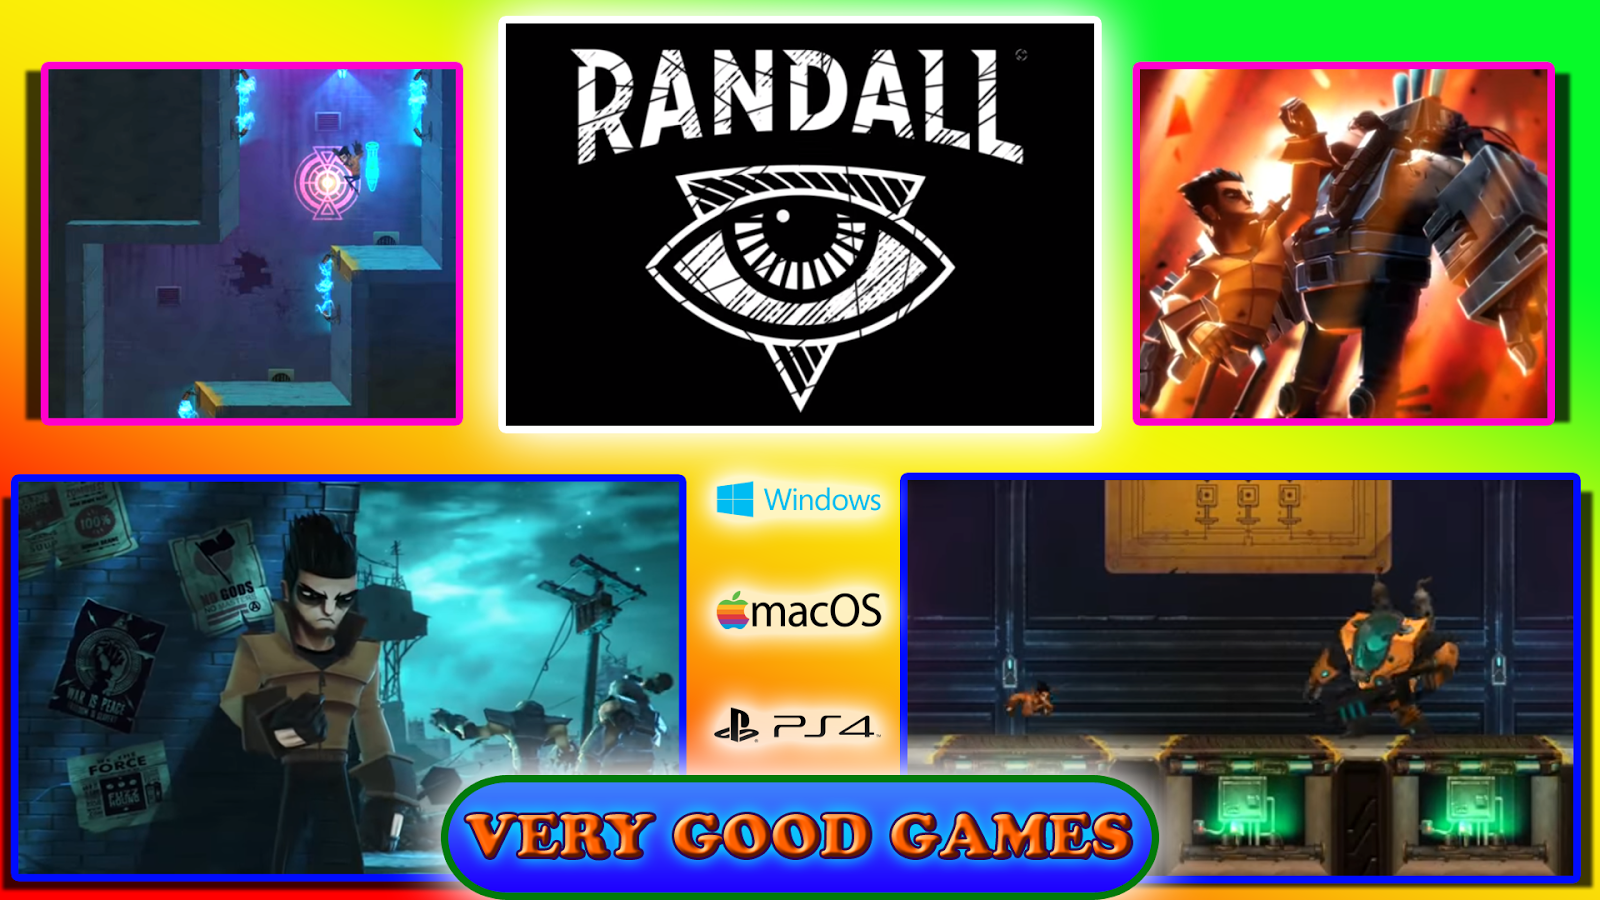 Screenshots of Randall - an action game for PS4 game consoles and for Windows computers